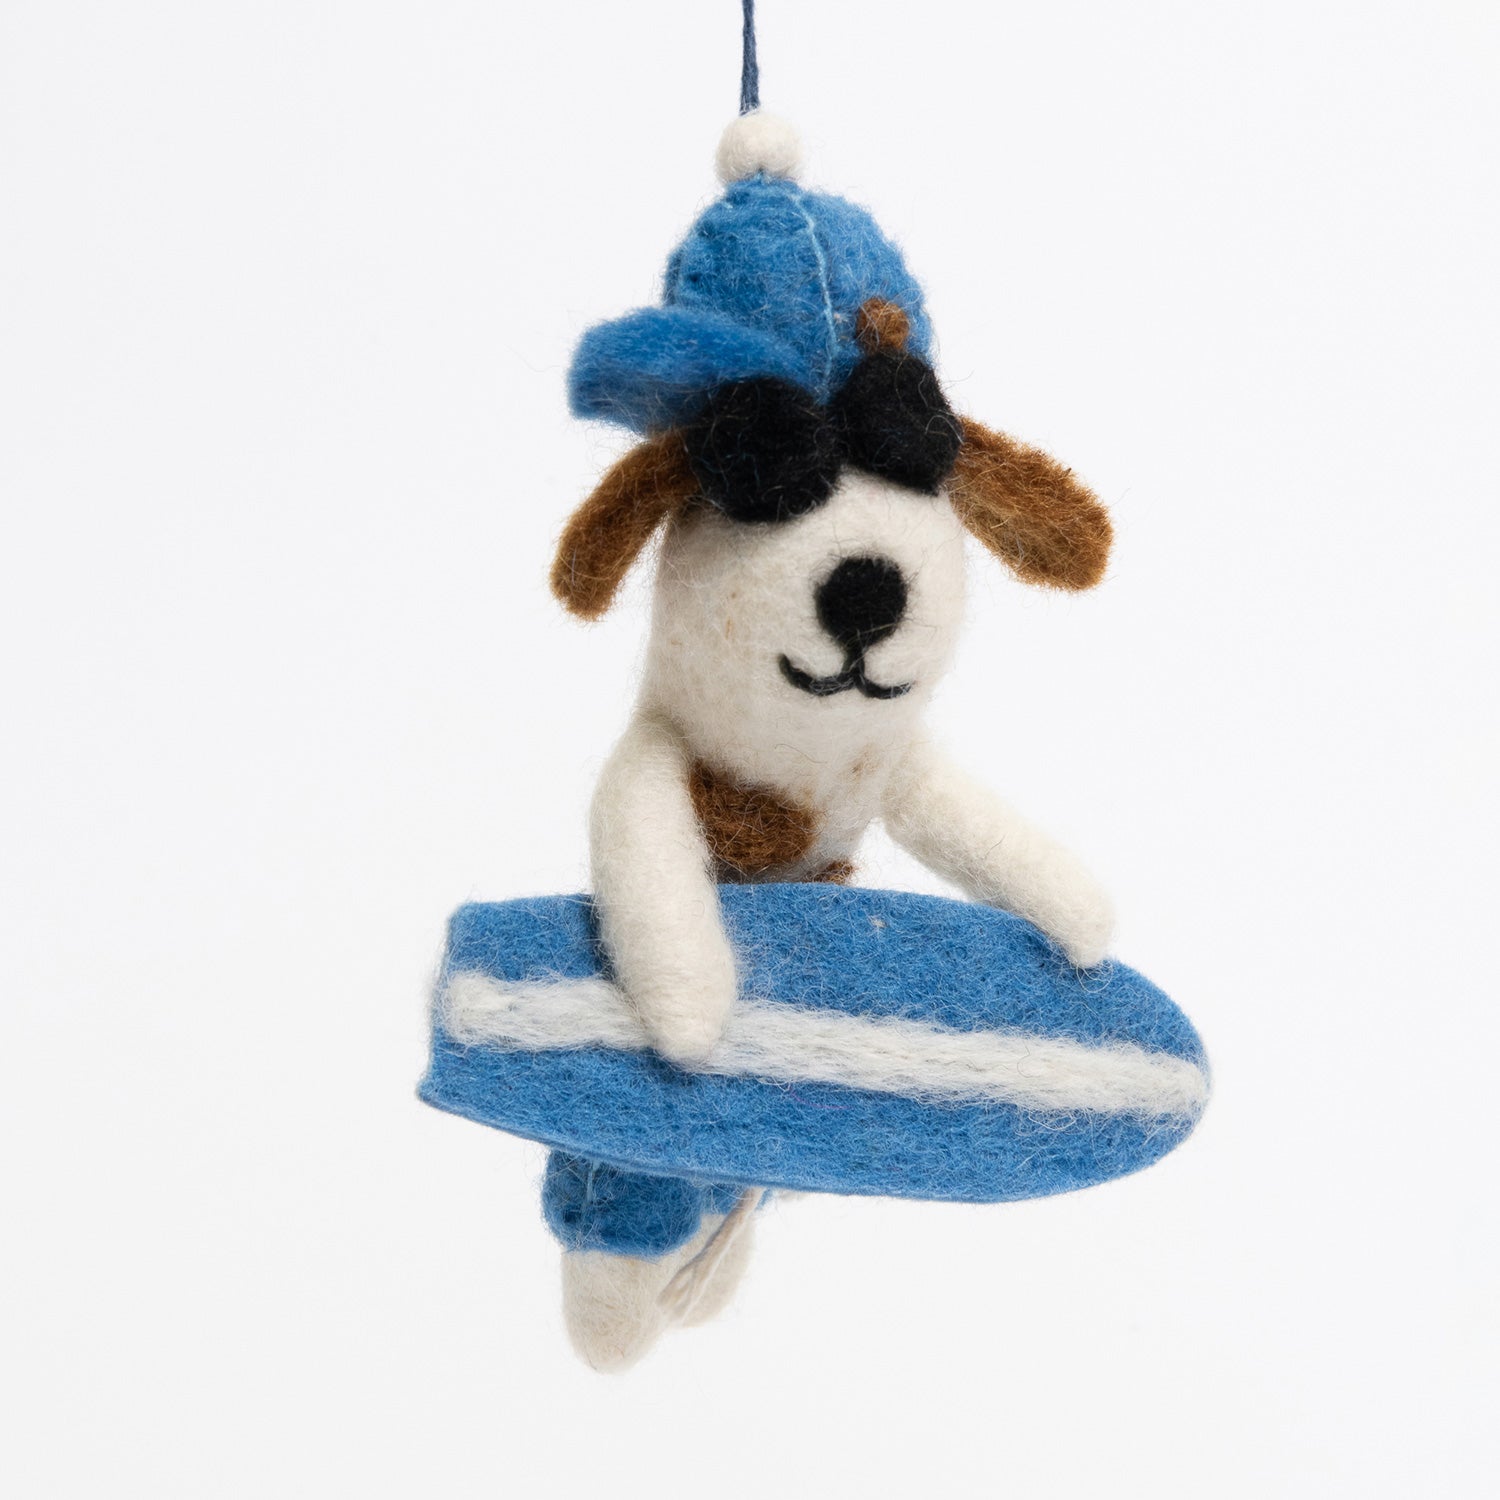 A surfer dog felt decoration pictured on a white background. The dog is white and brown, is wearing a blue hat and blue shorts, black sunglasses, and holding a blue and white surfboard. 